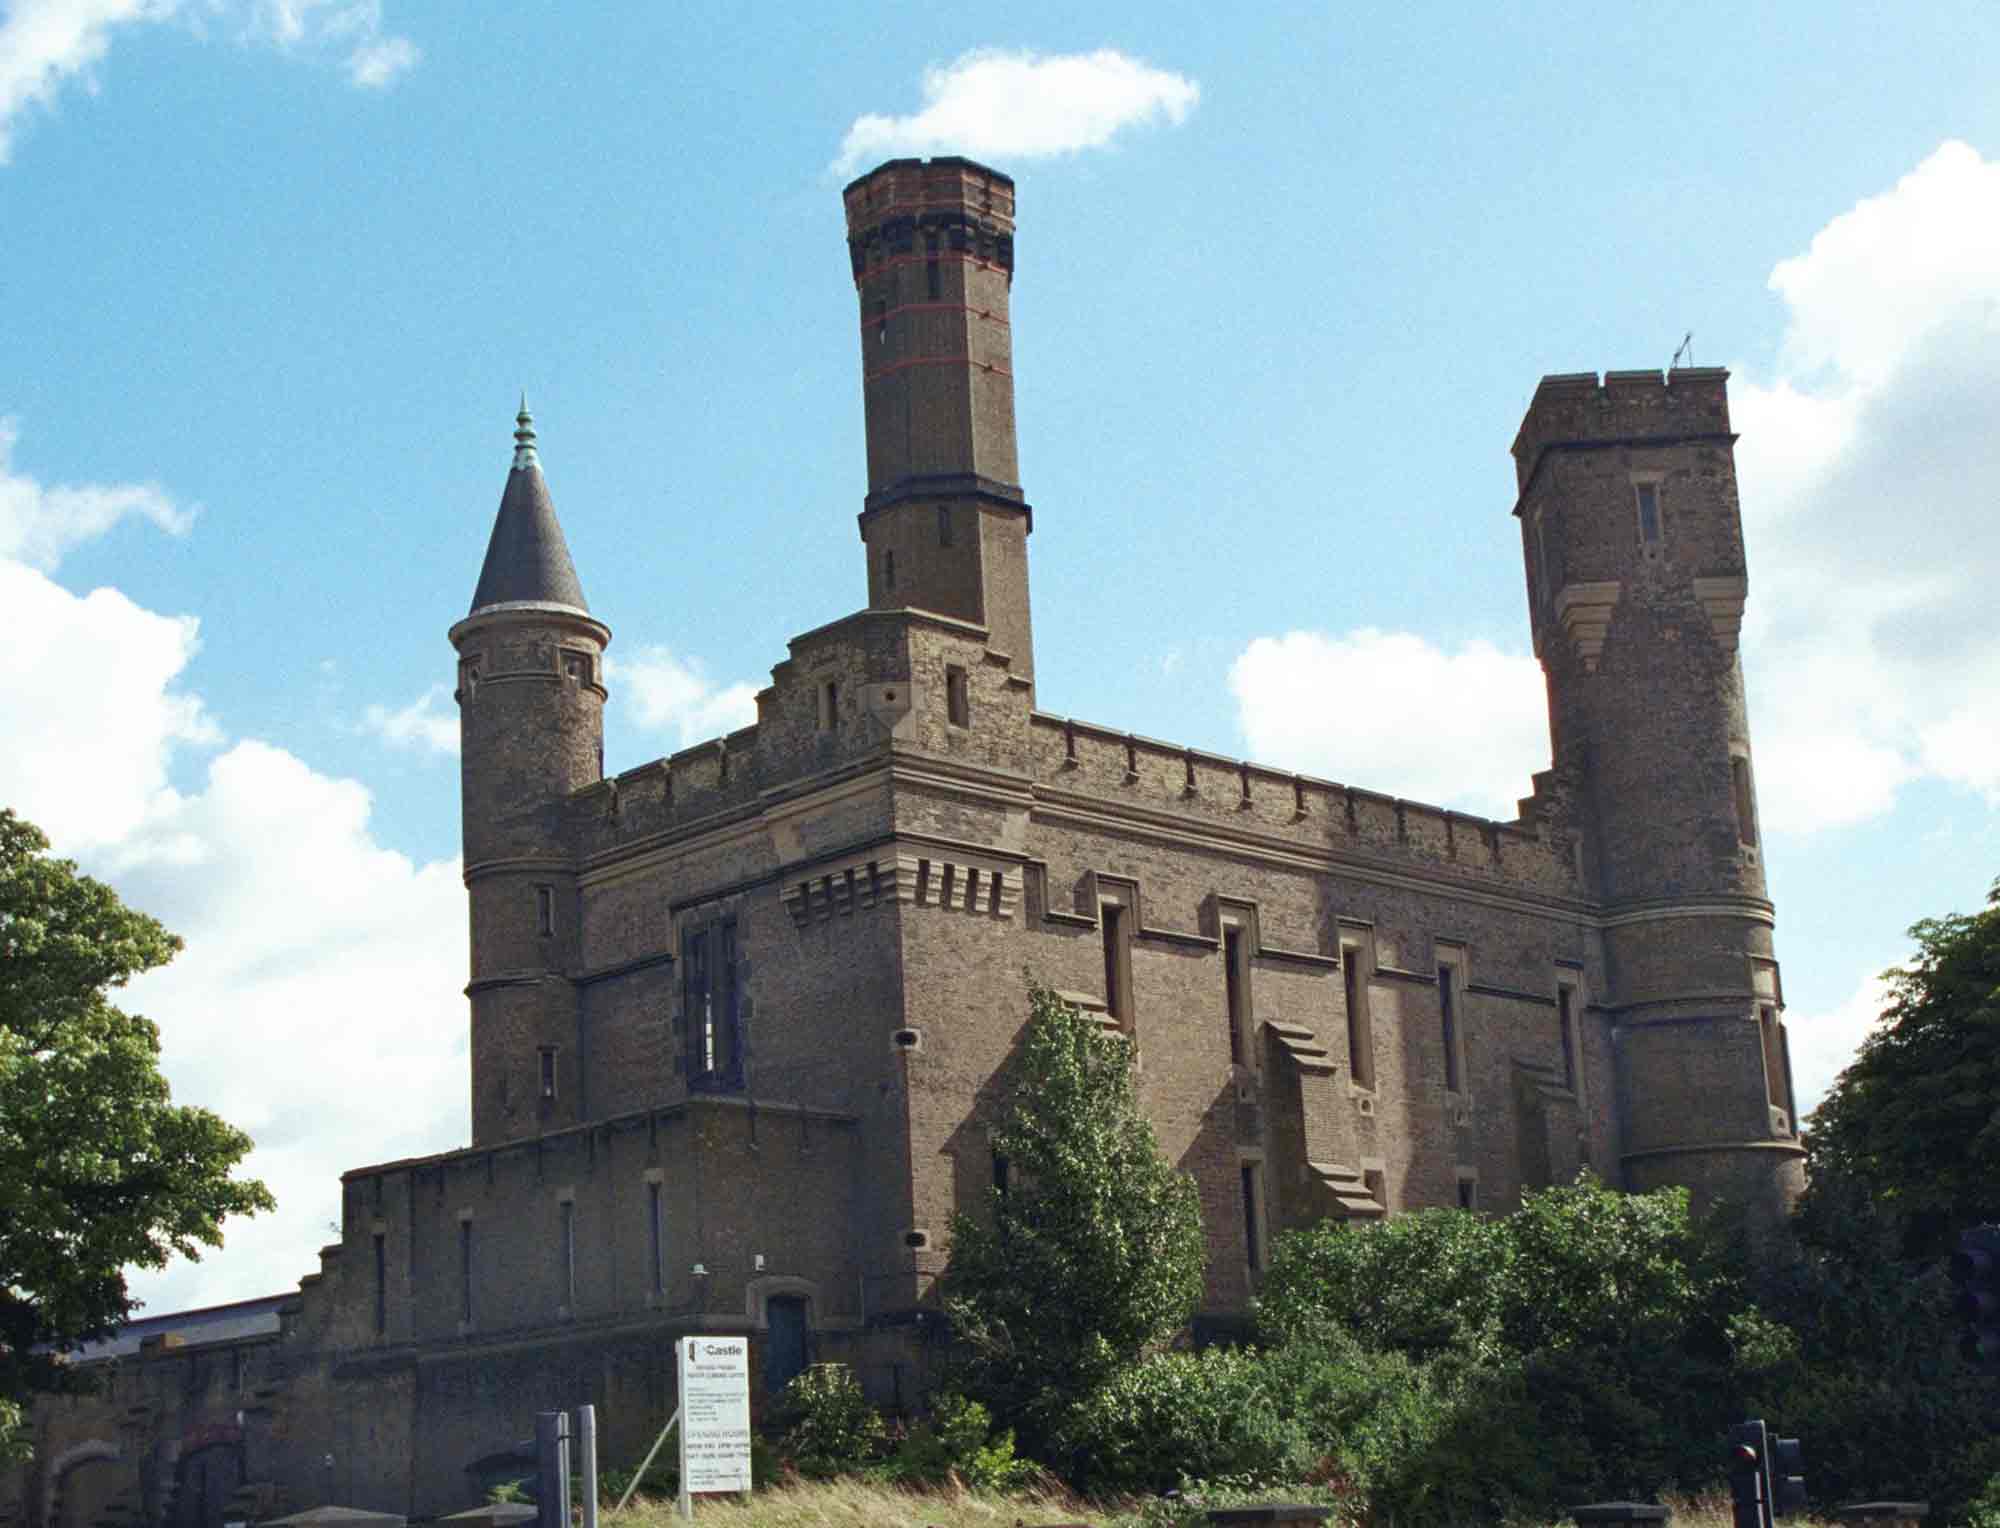 Pumping station resembling a castle.